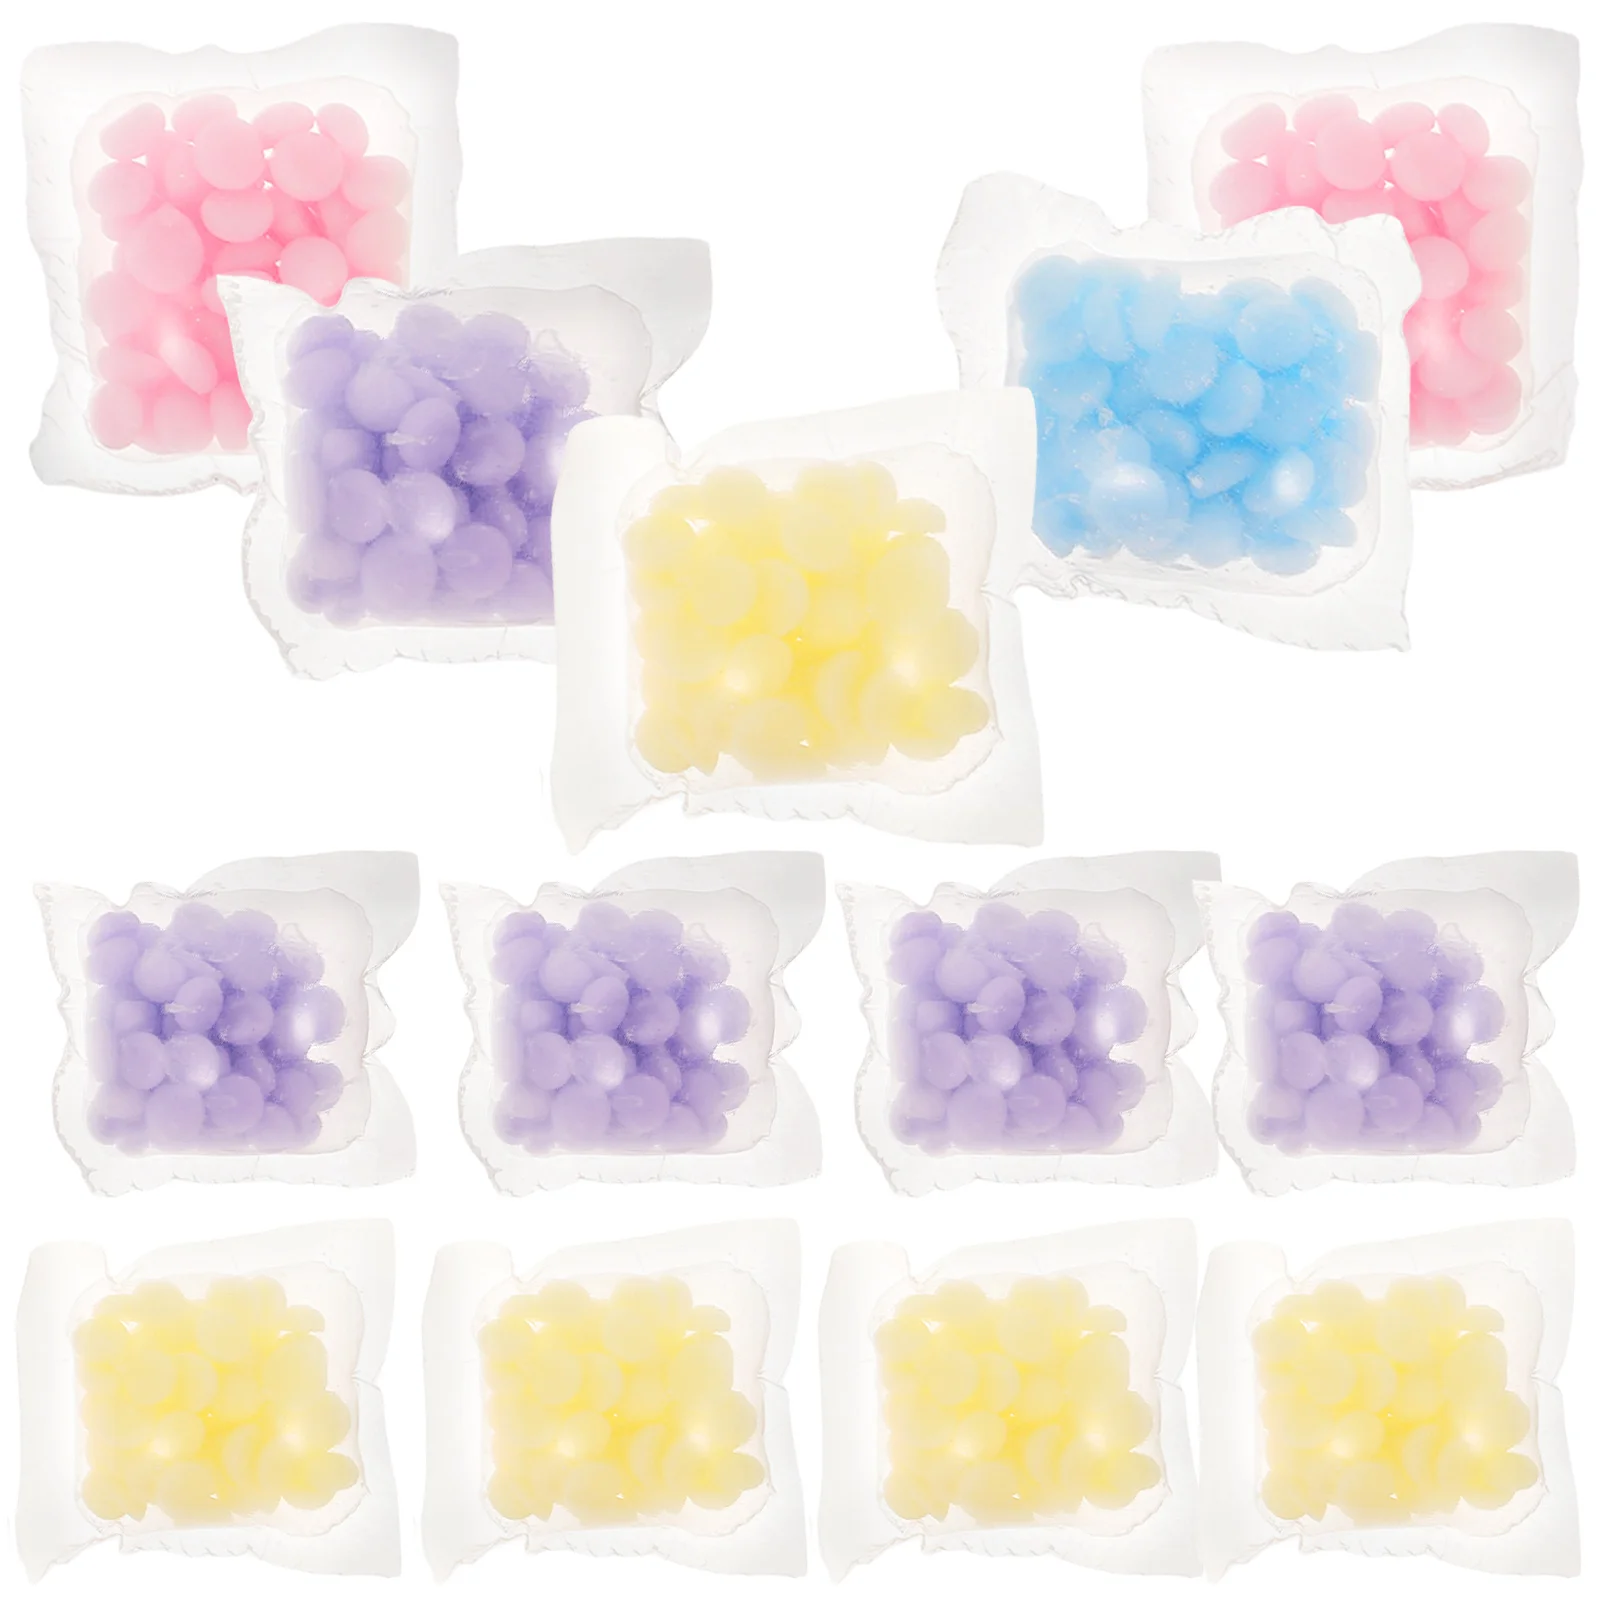 

50pcs 6g Home Laundry Beads Concentrated Laundry Cleaning Tools (Assorted Color)